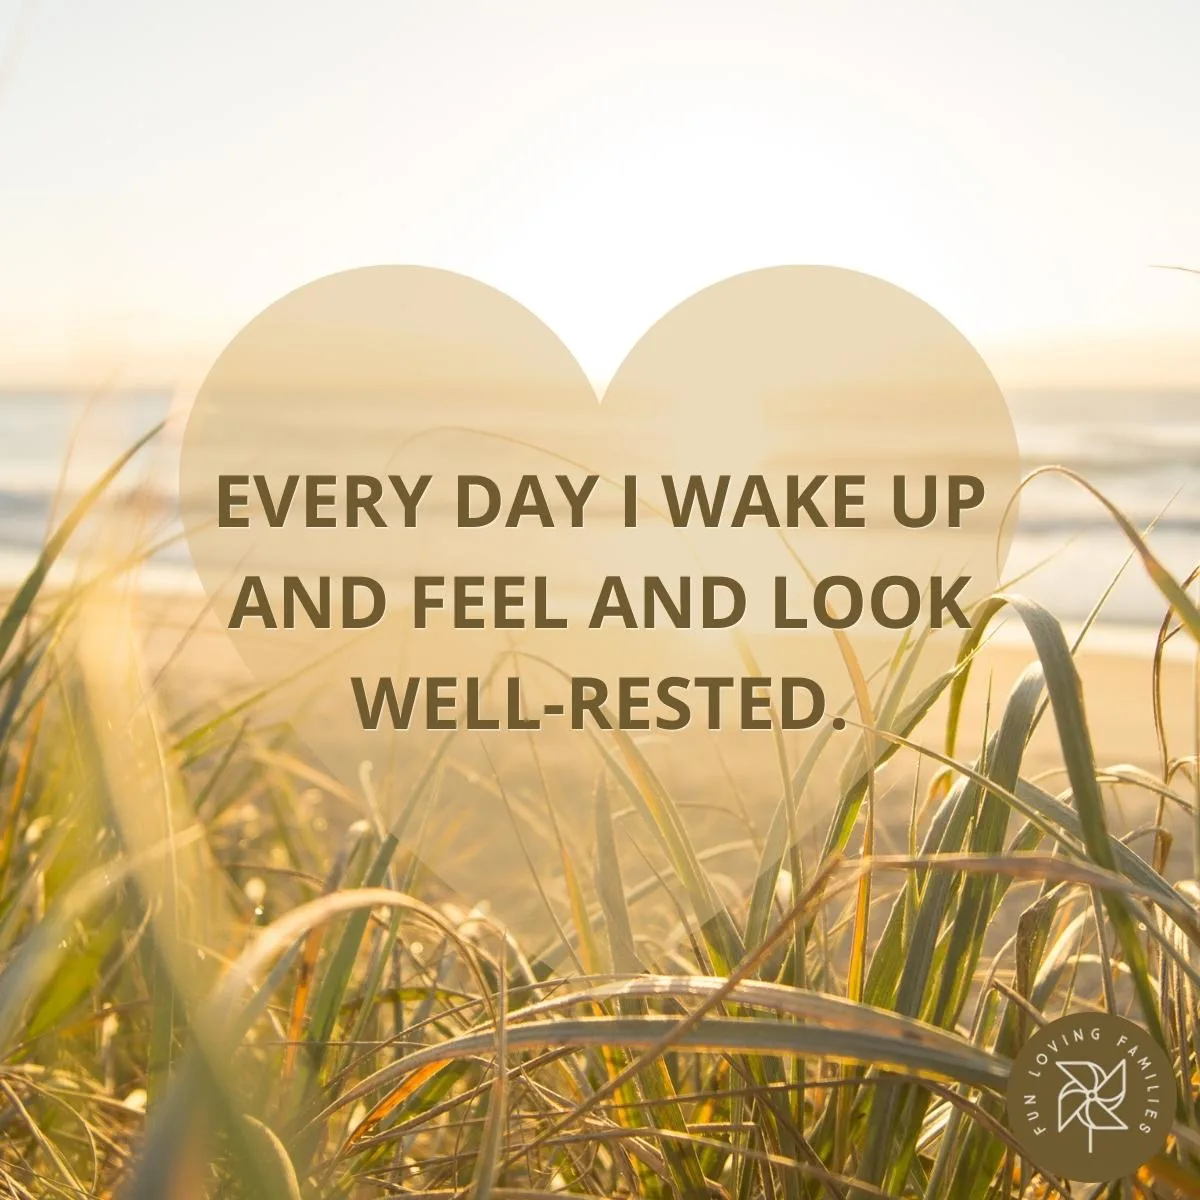 Every day I wake up and feel and look well-rested affirmation